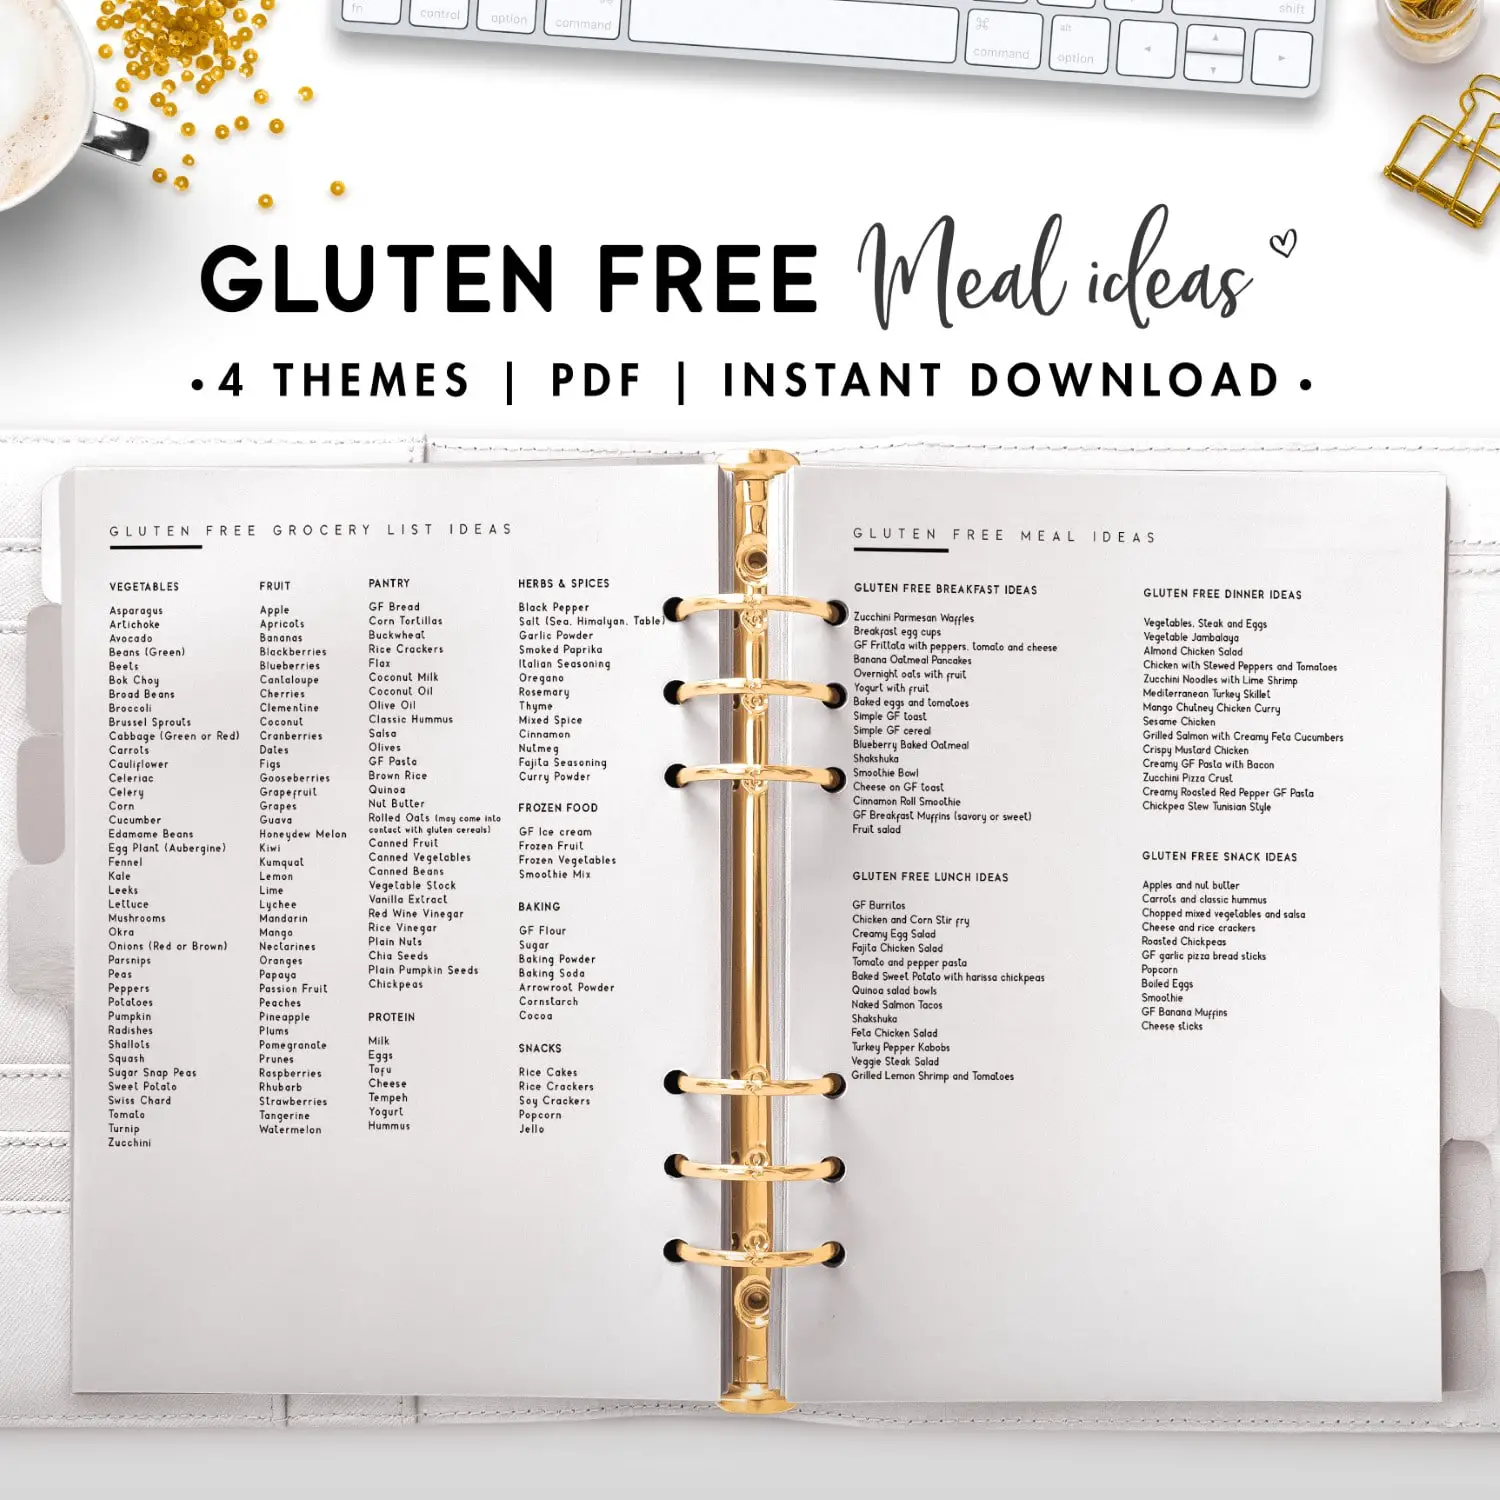 Gluten Free Grocery List Printable : The Dairy Free Shopping List For ...